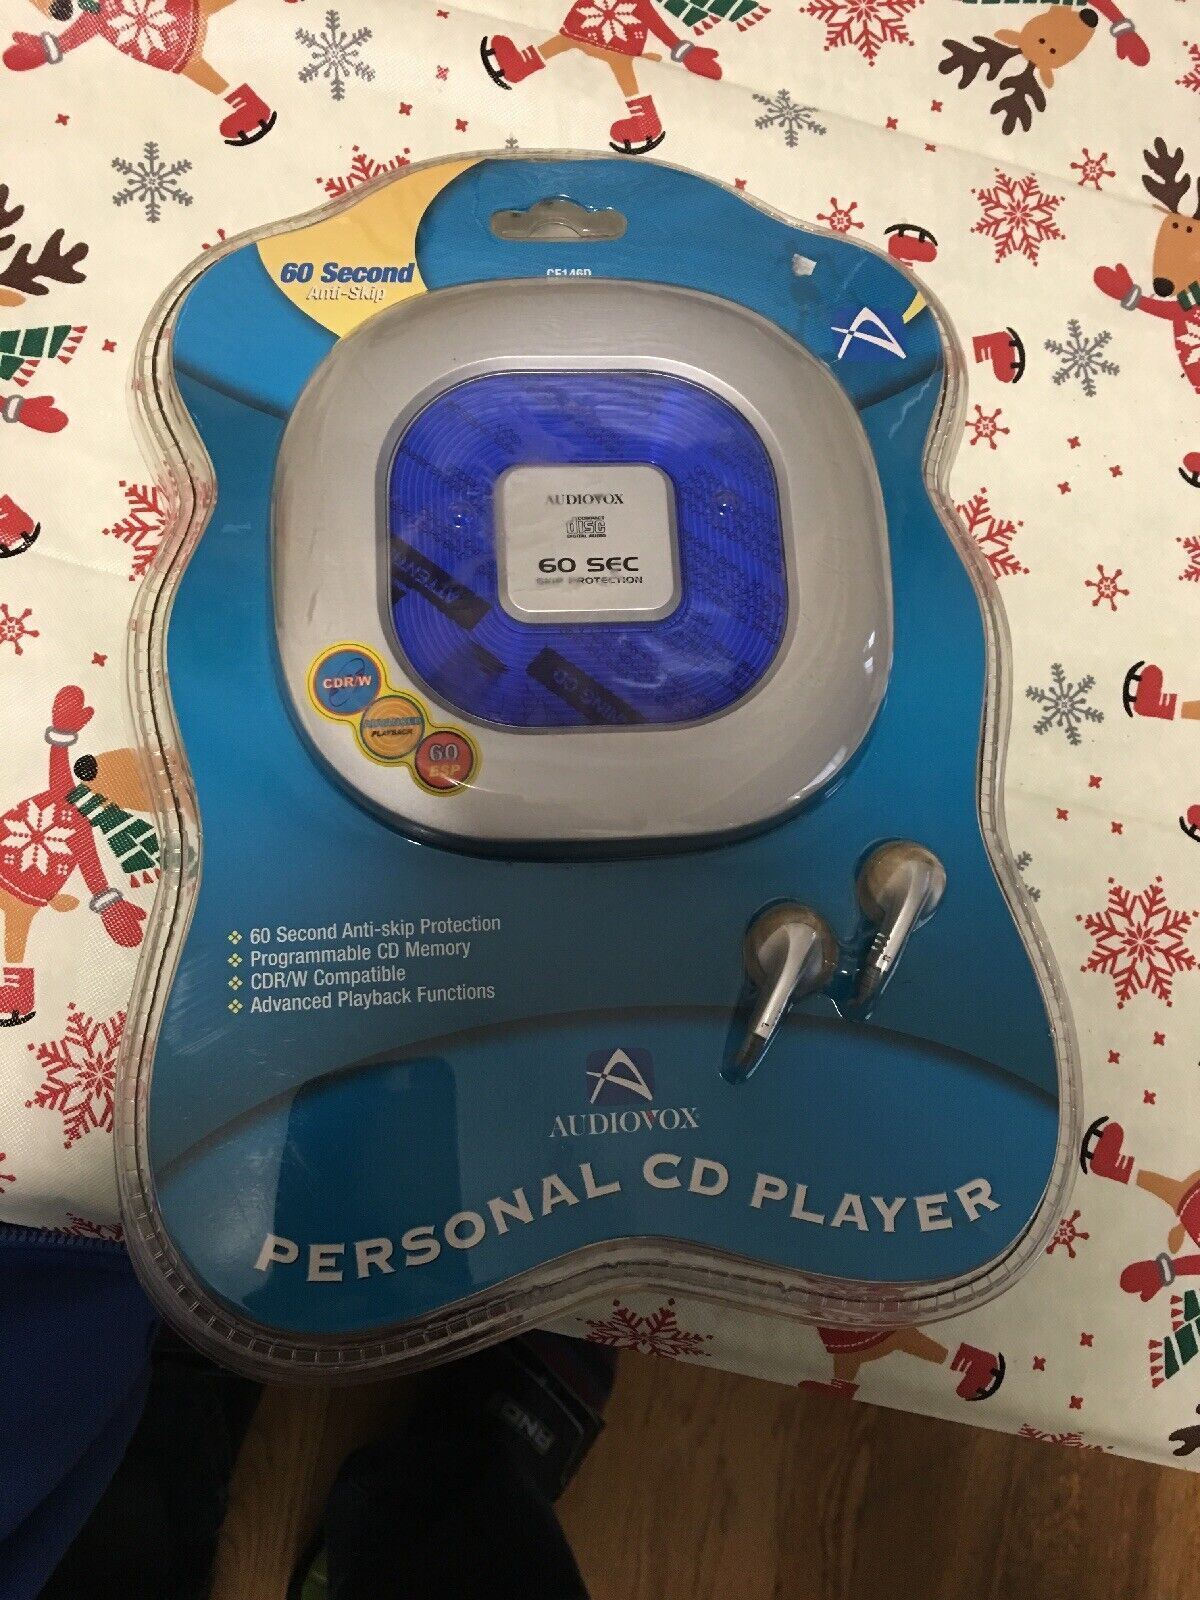 AudioVox Personal Cd Player , Brand New  Model CE146D